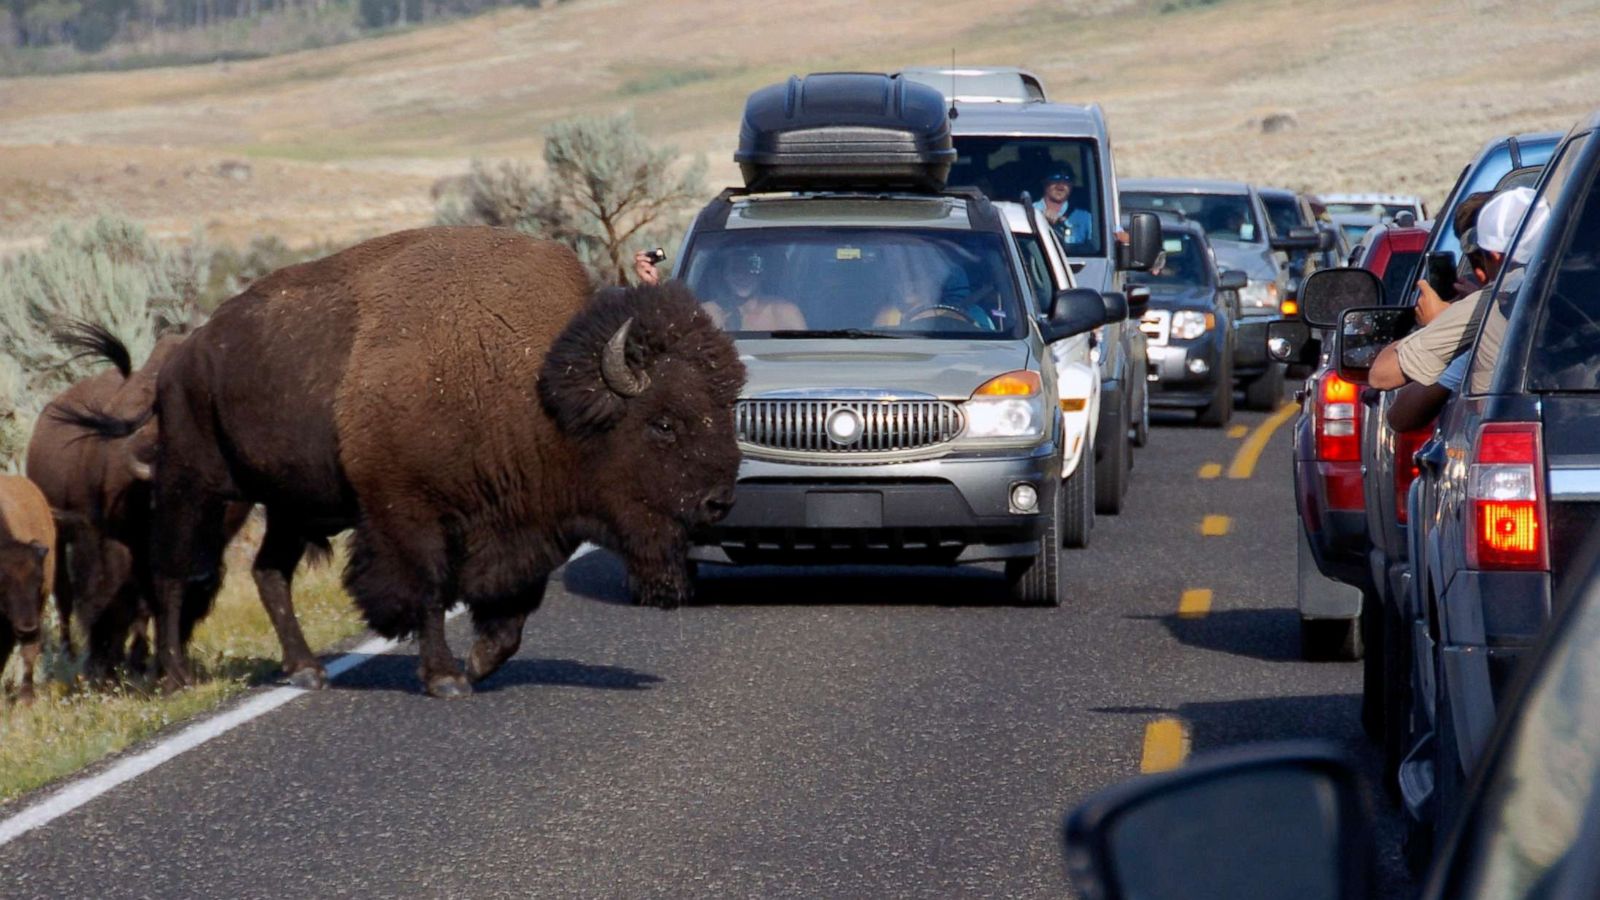 Bison attacks: How to stay safe from wildlife when visiting national parks  - ABC News